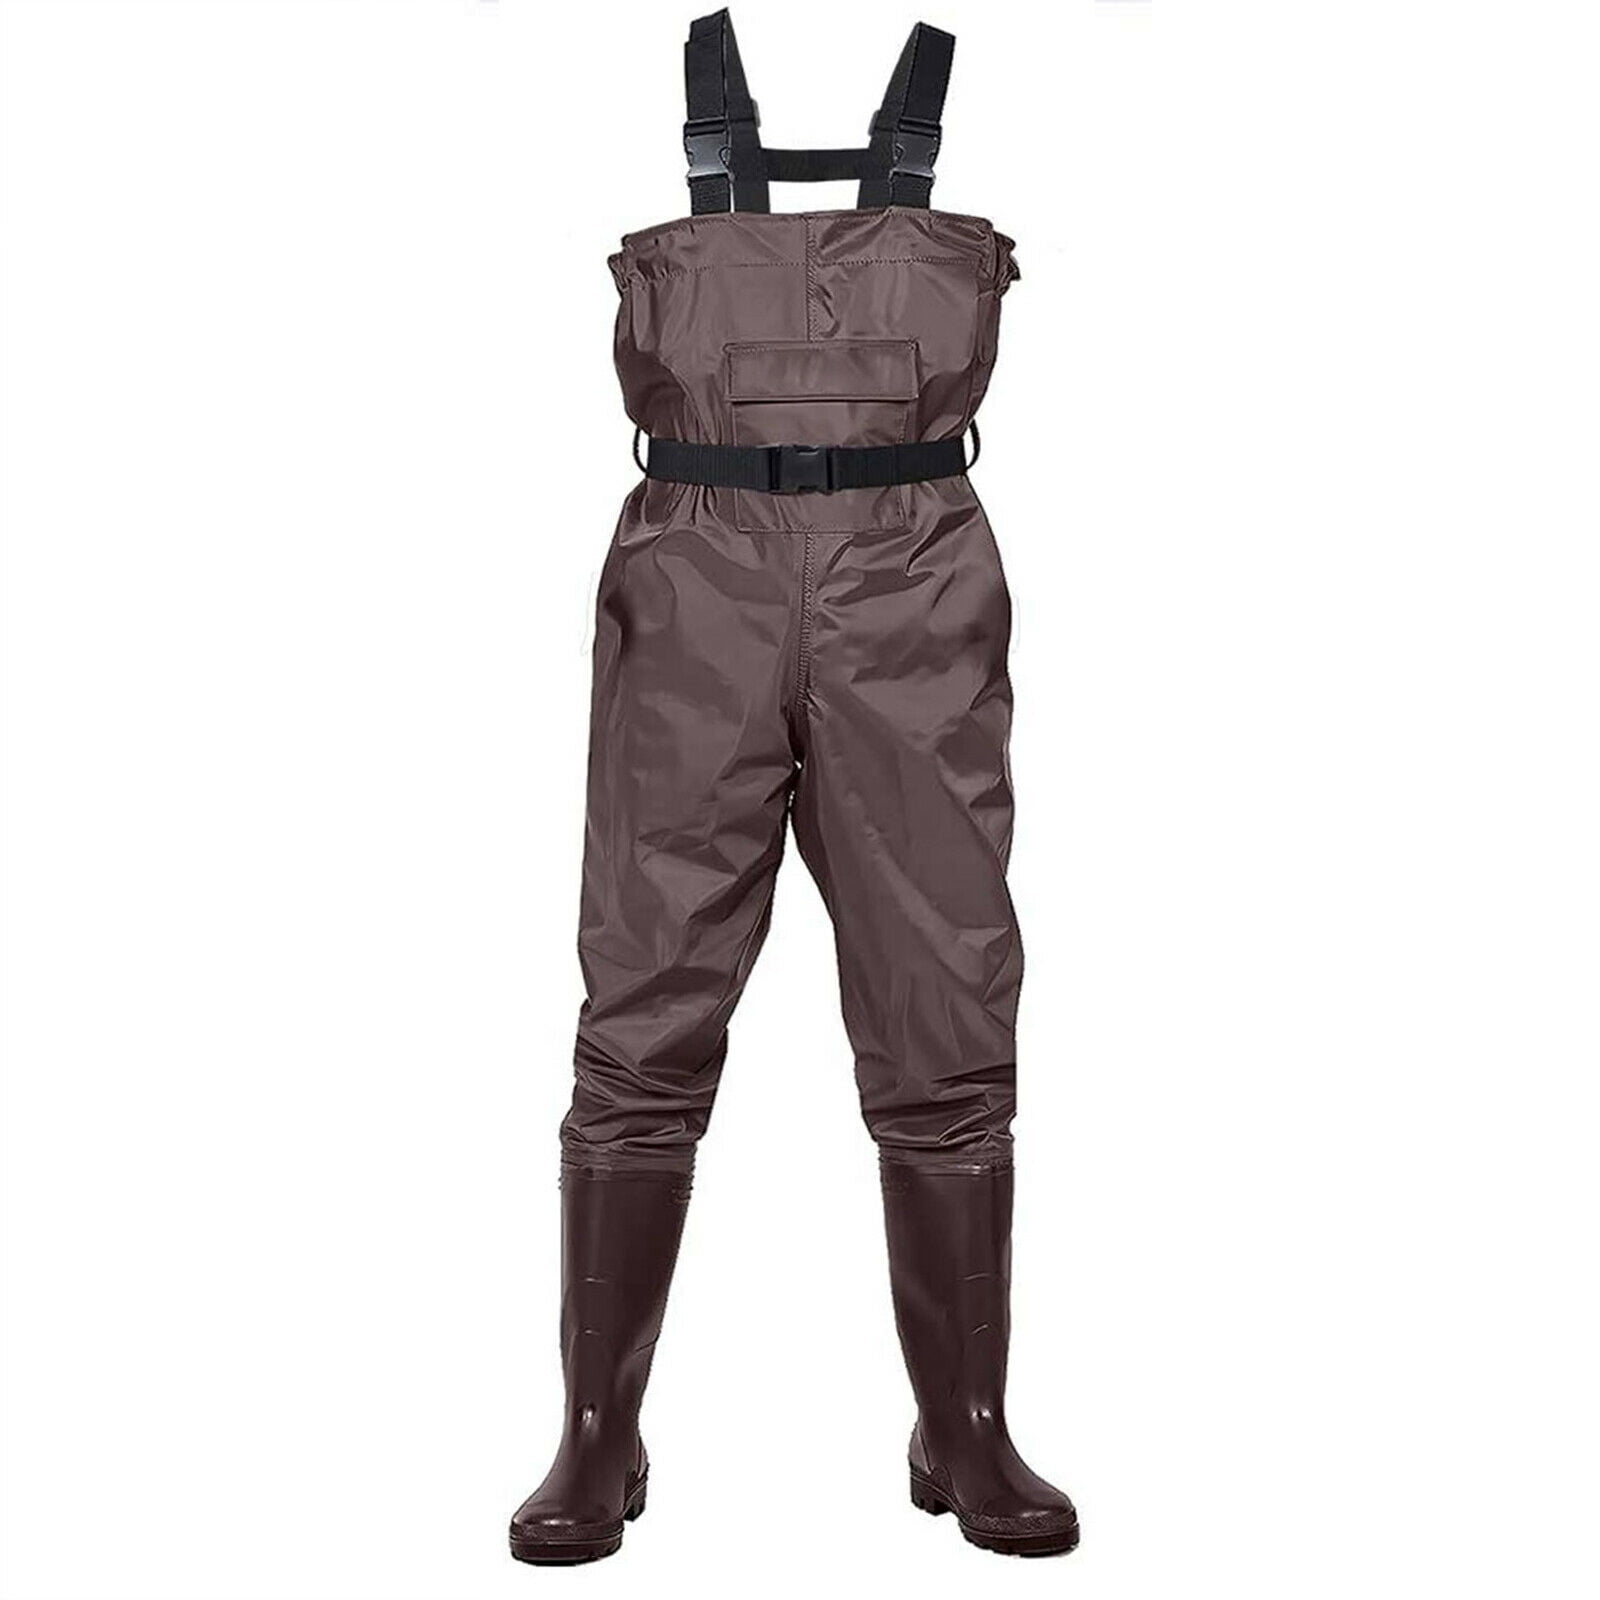 Fly Fishing Hunting Chest Waders Waterproof Stocking Foot Wader Pants with  Boots